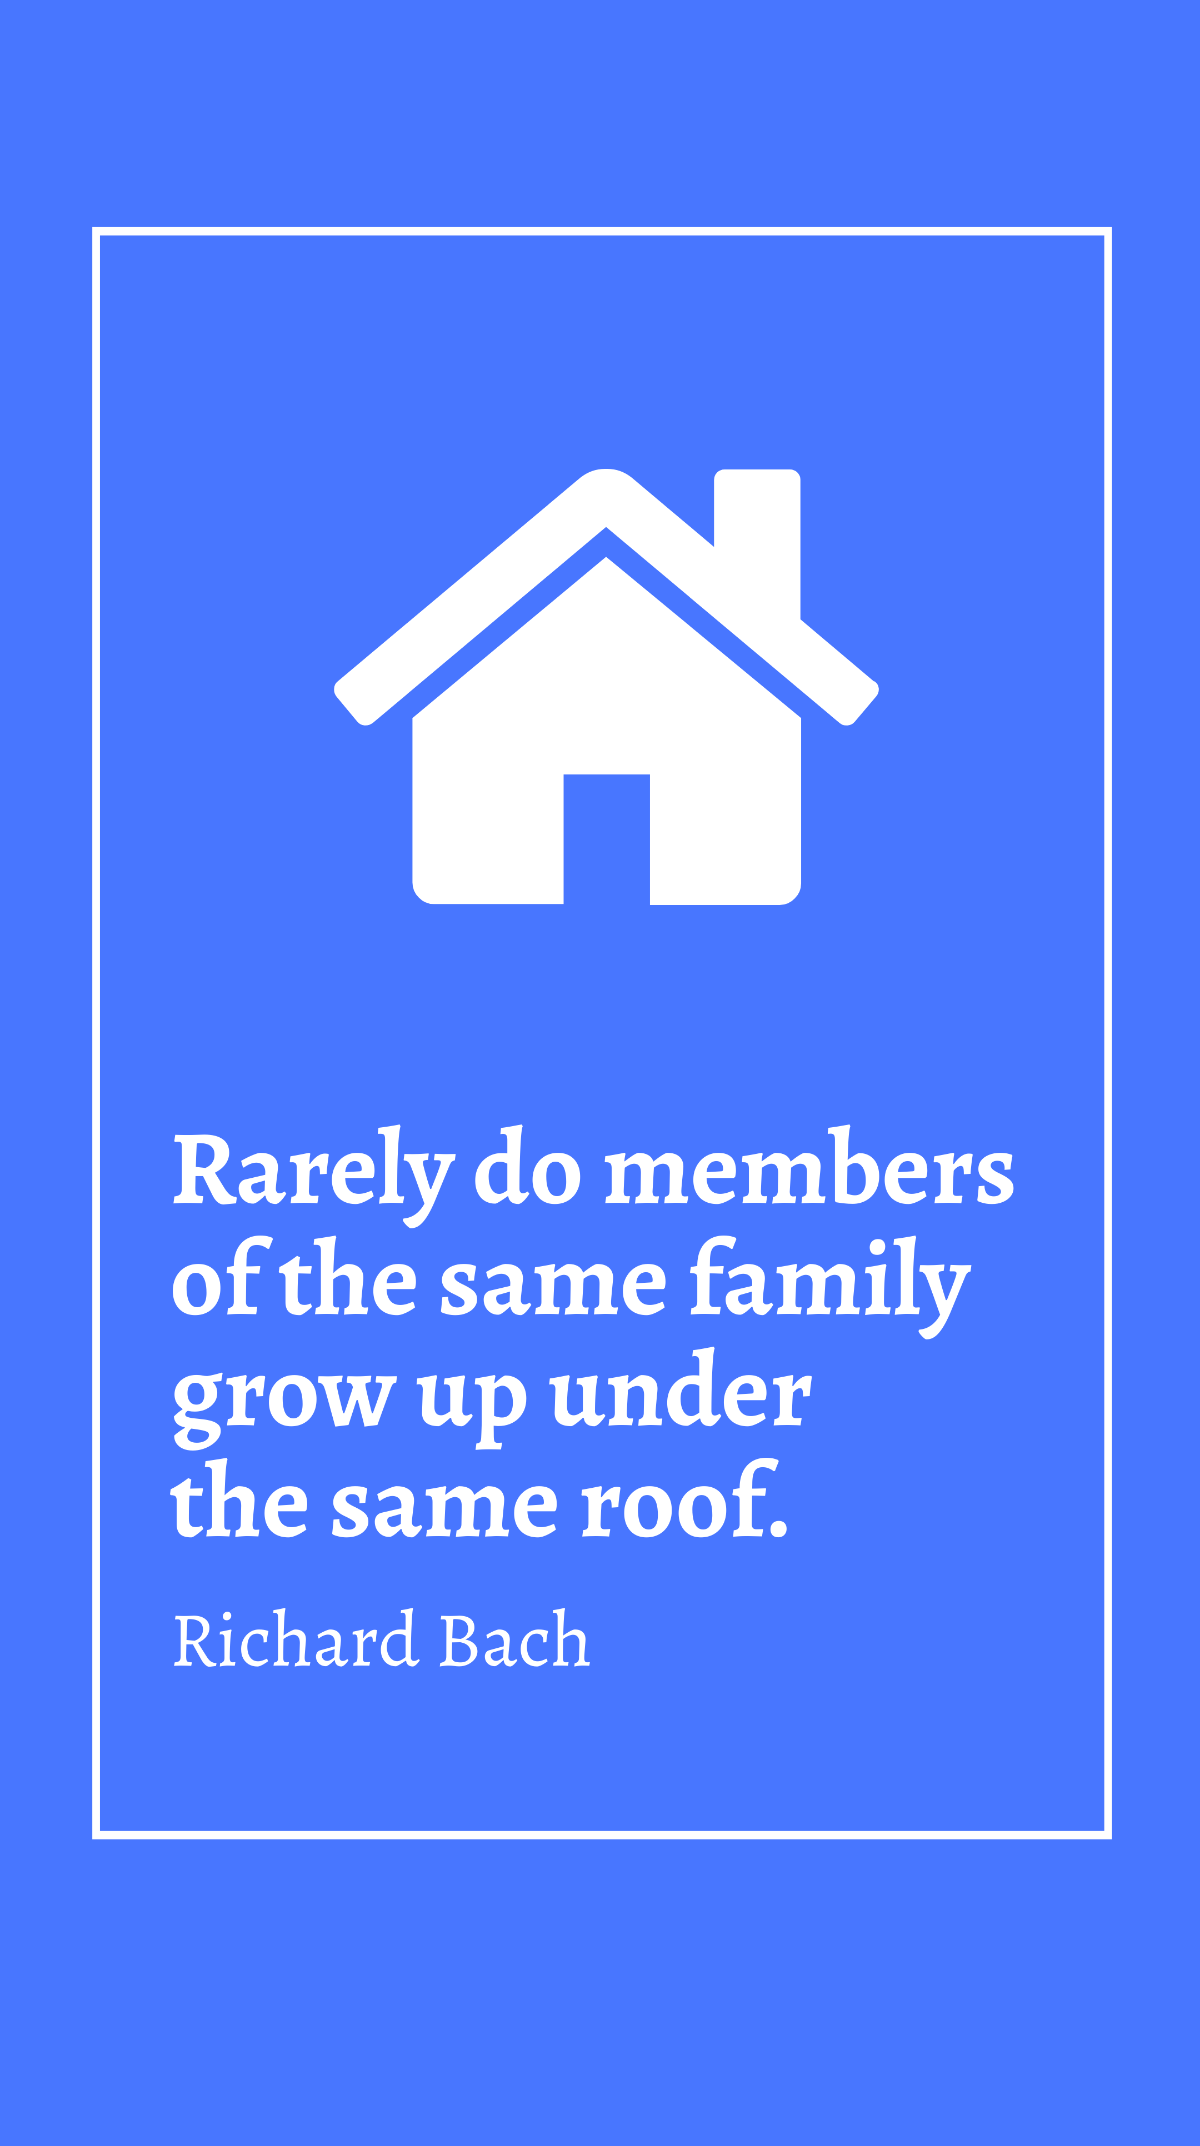 Free Richard Bach - Rarely do members of the same family grow up under the same roof. Template